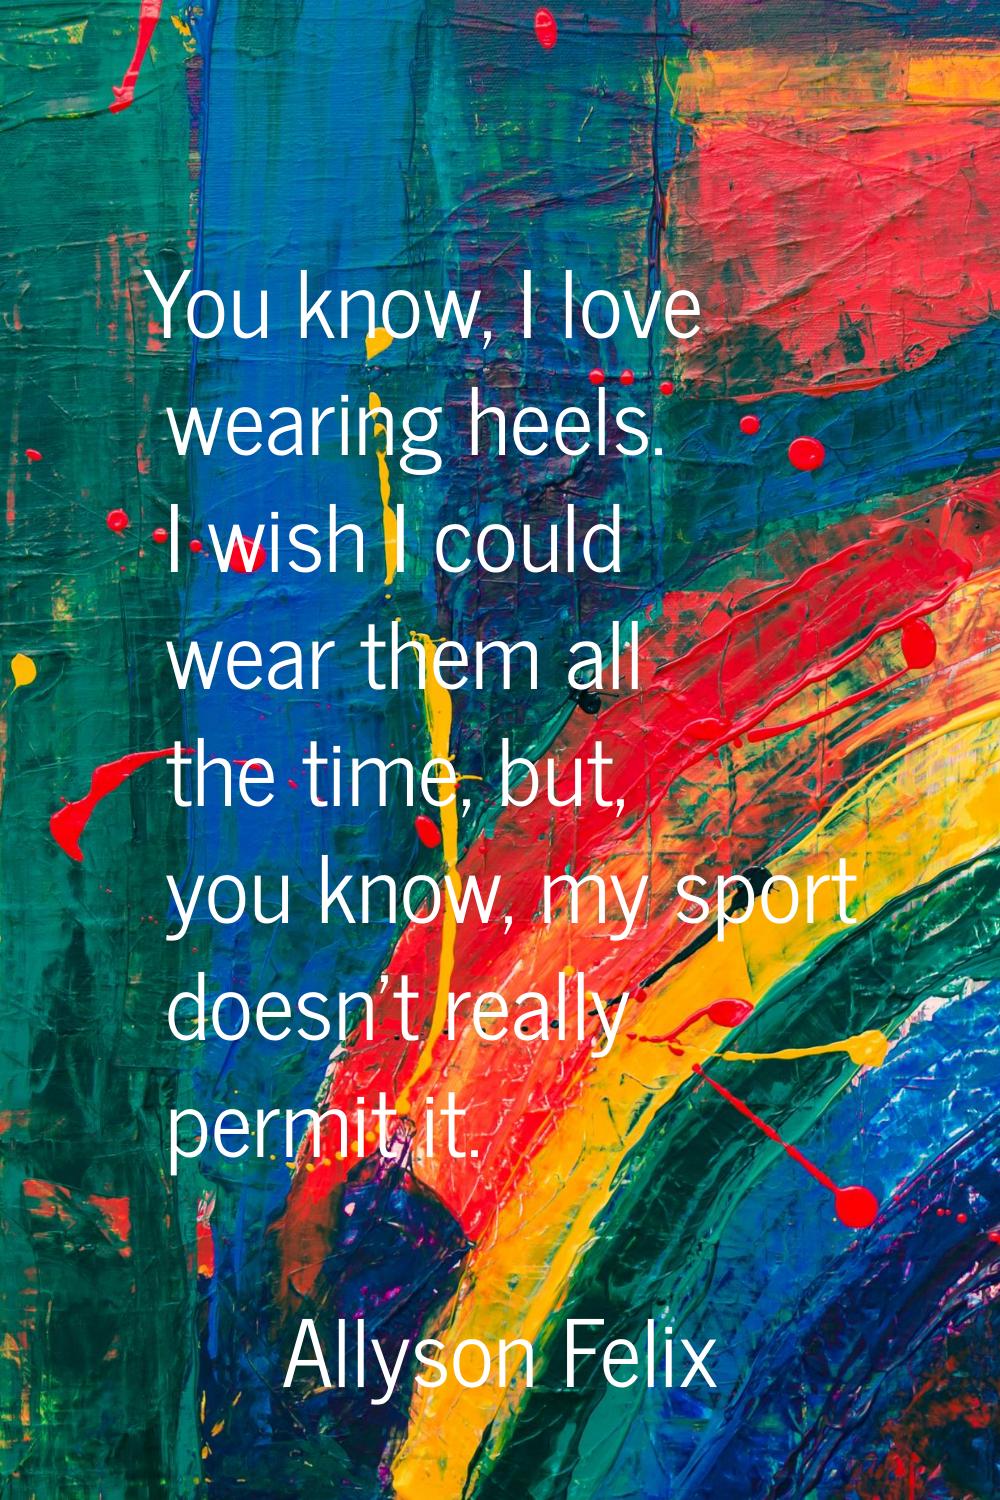 You know, I love wearing heels. I wish I could wear them all the time, but, you know, my sport does